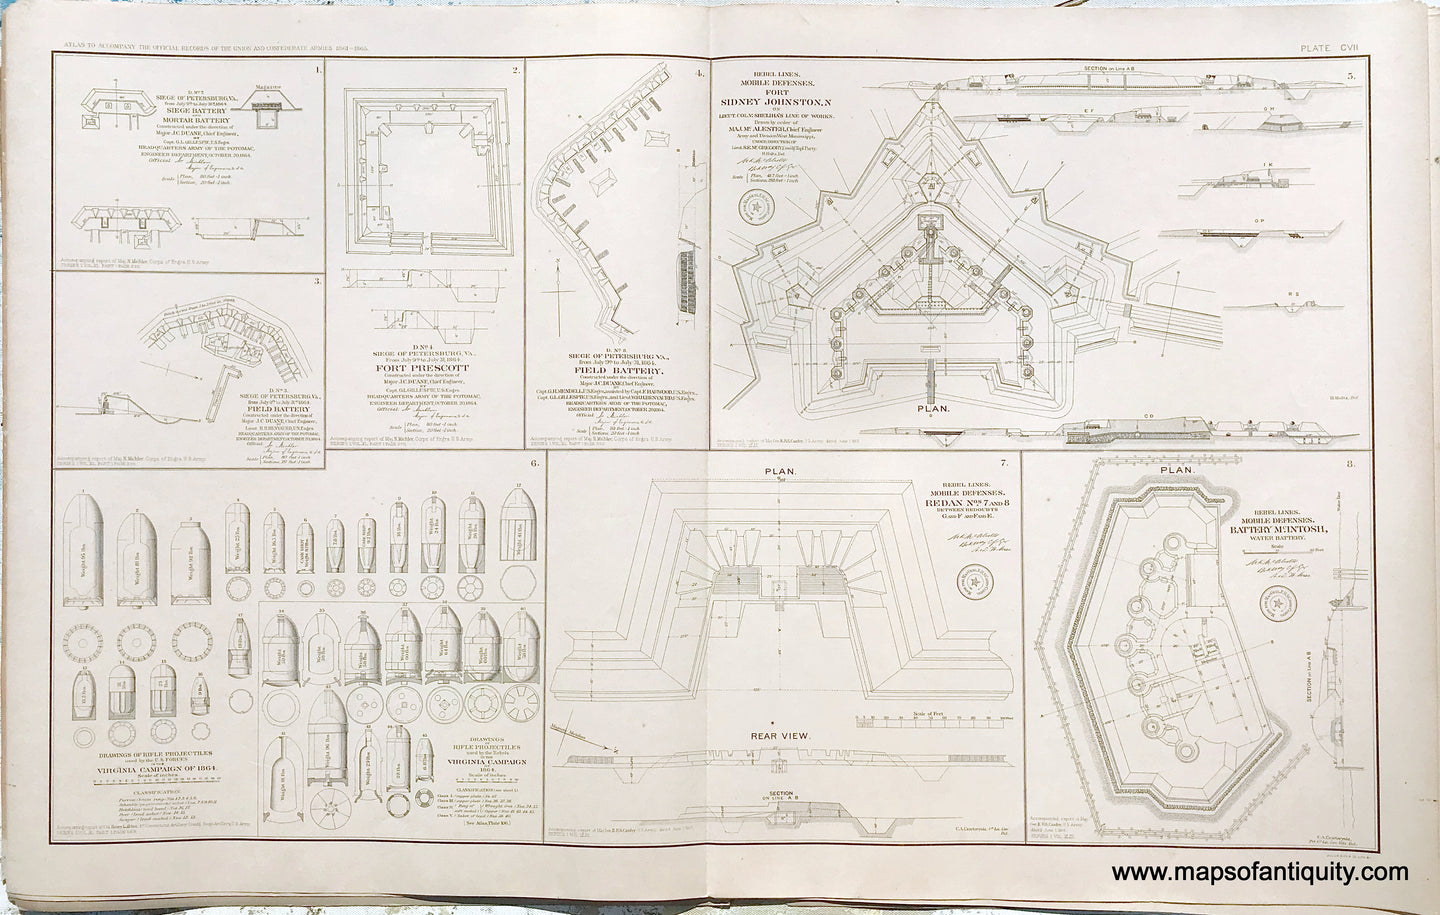 Antique-Lithograph-Print-Plate-107.-Four-maps-of-Siege-of-Petersburg-Va.-July-1864-/-Drawings-of-Rifle-Projectiles-in-the-Virginia-Campaign-of-1864-/-Mobile-Defenses-Fort-Sidney-Johnston-N.-/-Mobile-(AL)-Defenses-Battery-McIntosh-water-battery-/-Mobile-Defenses-Redan-Nos.-7-and-8.-1893-US-War-Dept.-Civil-War-Civil-War-1800s-19th-century-Maps-of-Antiquity